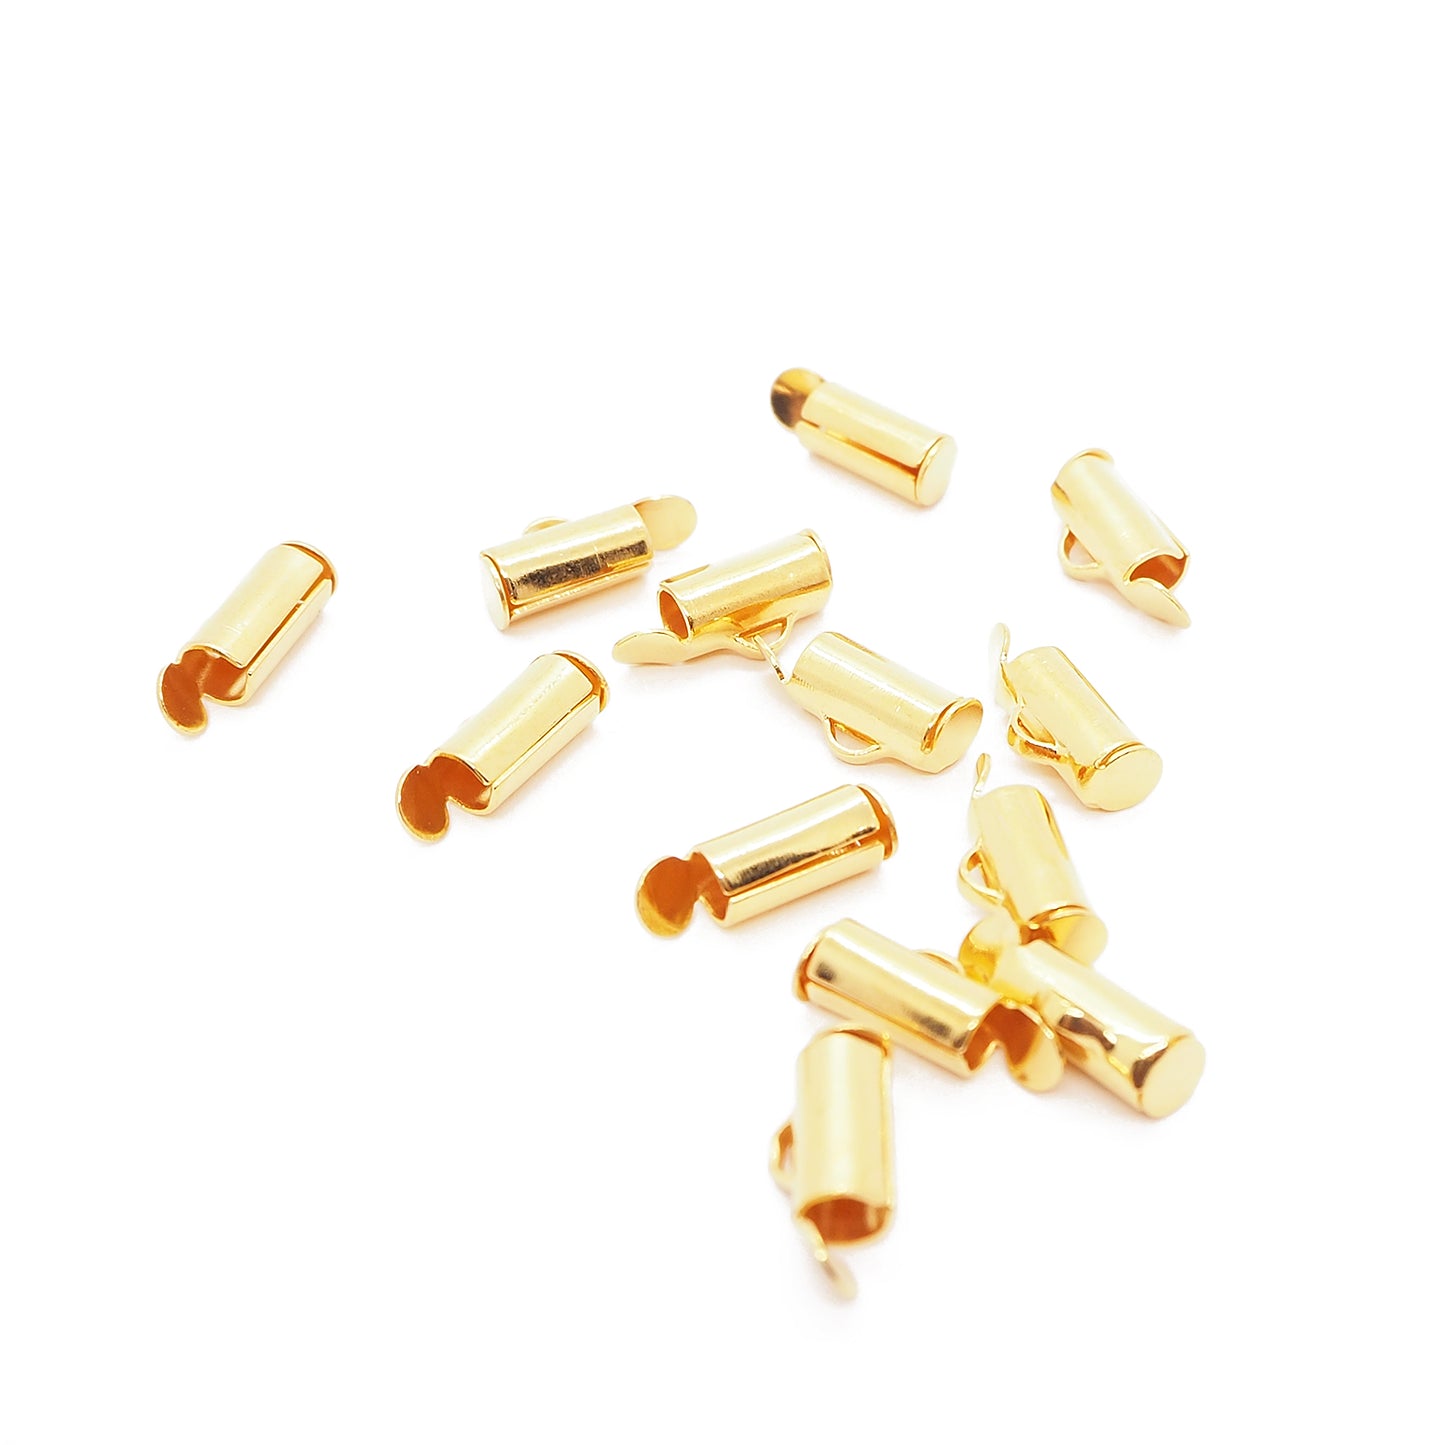 Hinged end piece end cap / gold-colored / 9mm